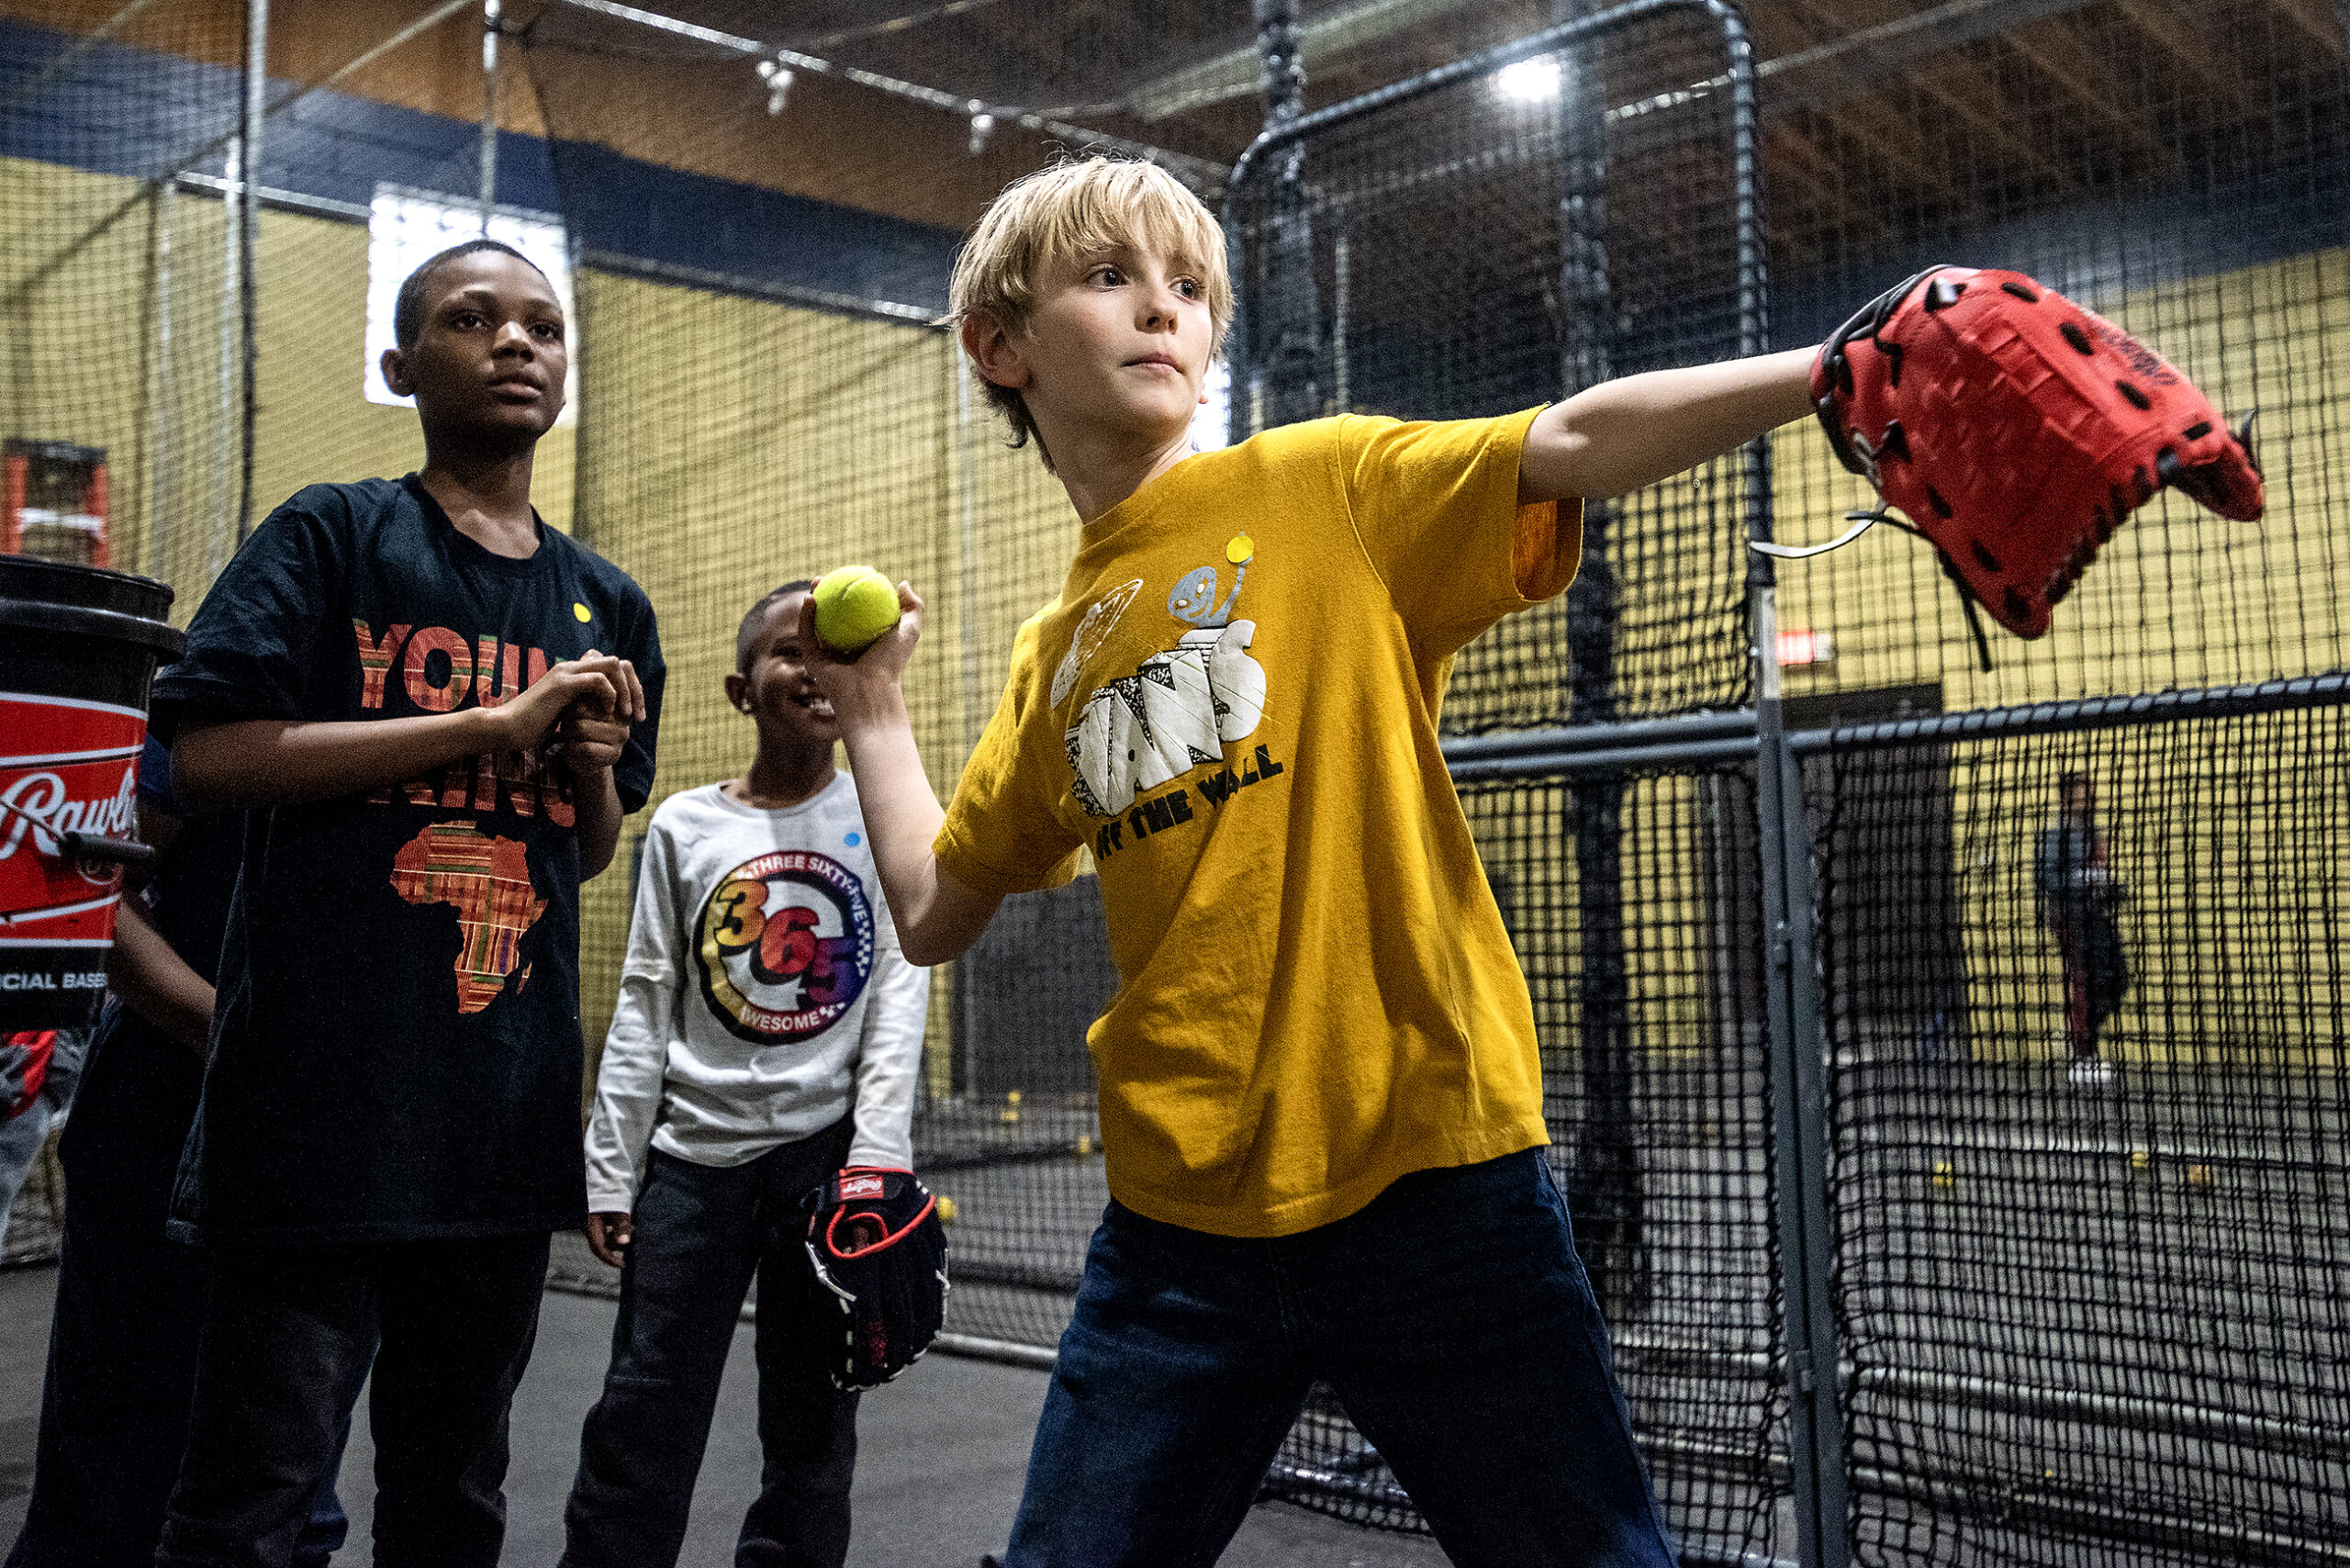 A child in a yellow shirt throws a ball in an indoor practice facility.